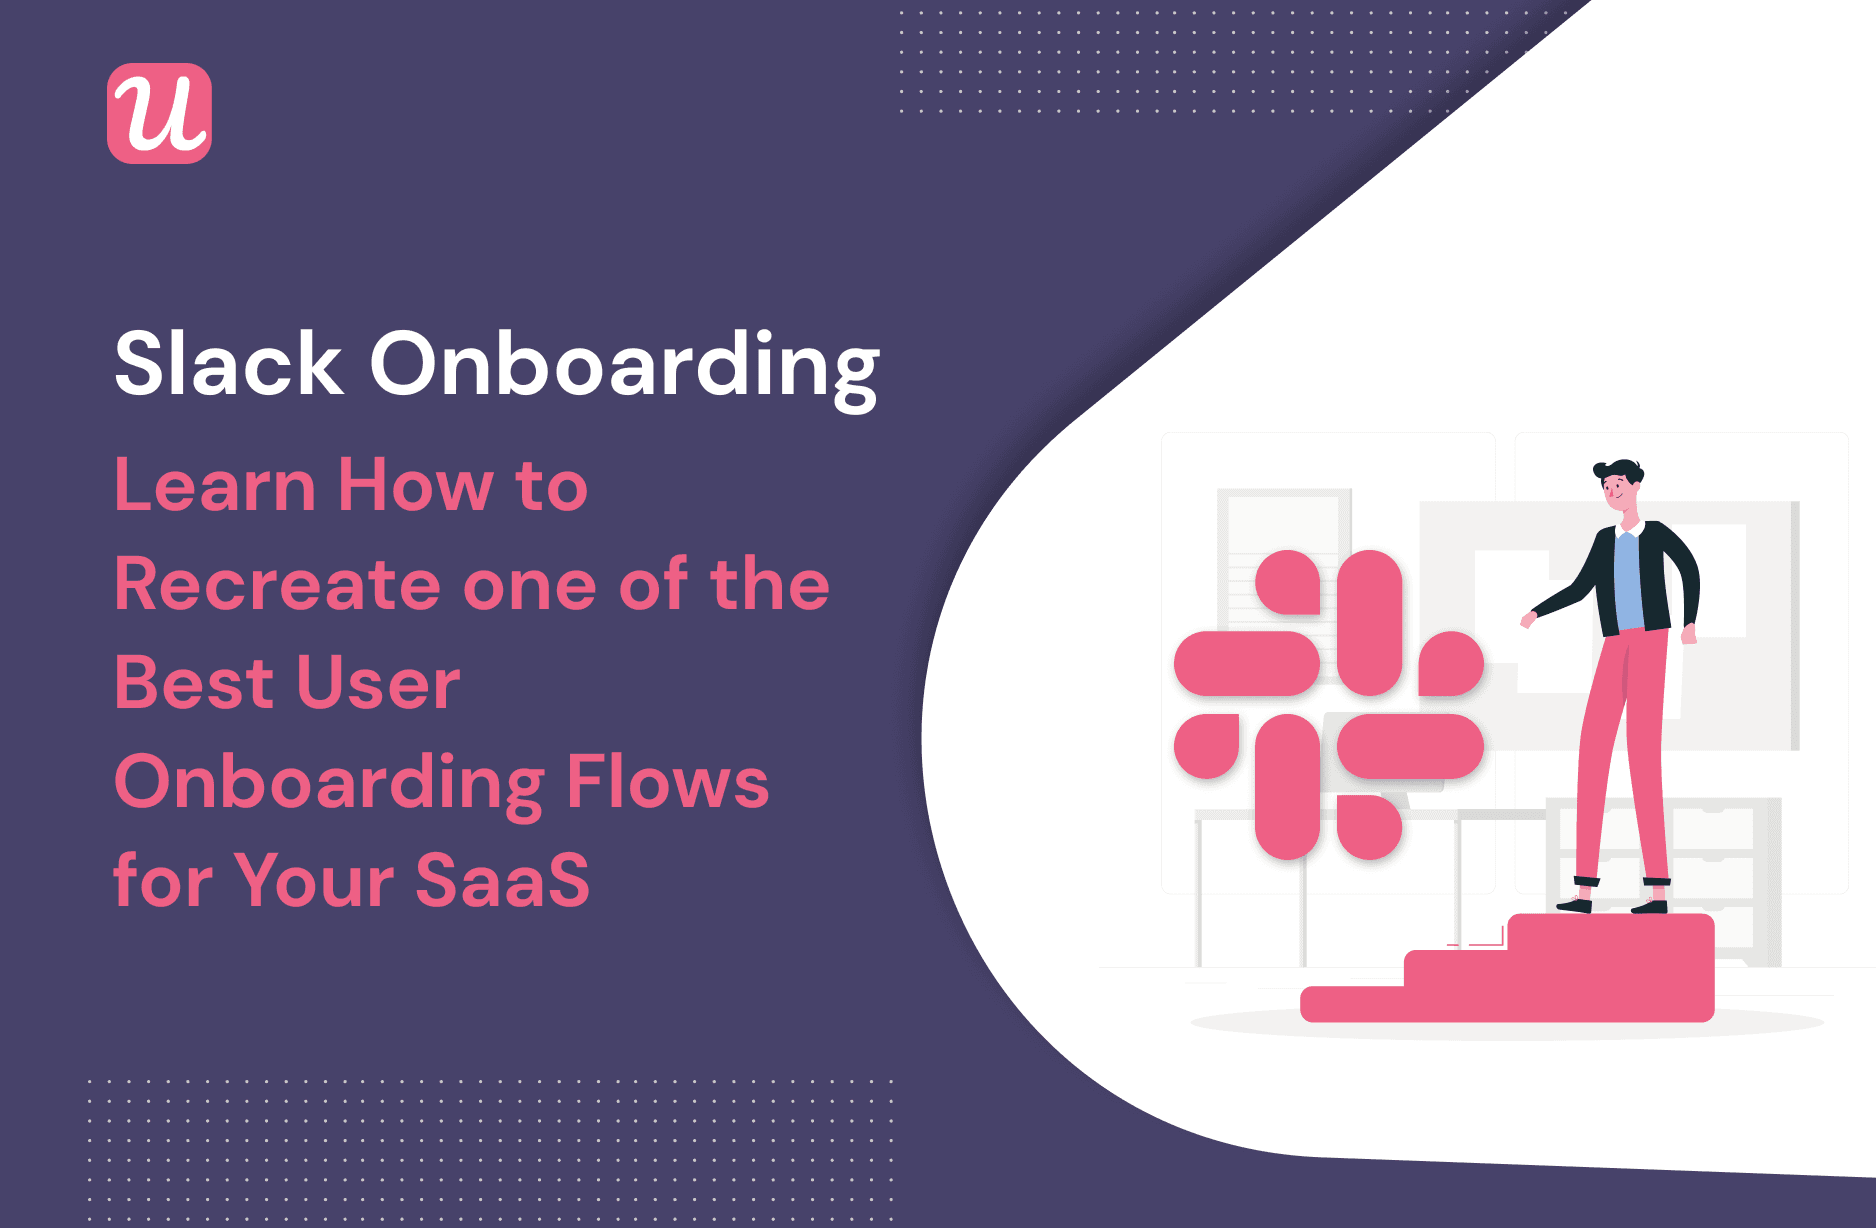 Slack Onboarding - Learn How To Recreate One Of The Best User Onboarding Flows For Your SaaS